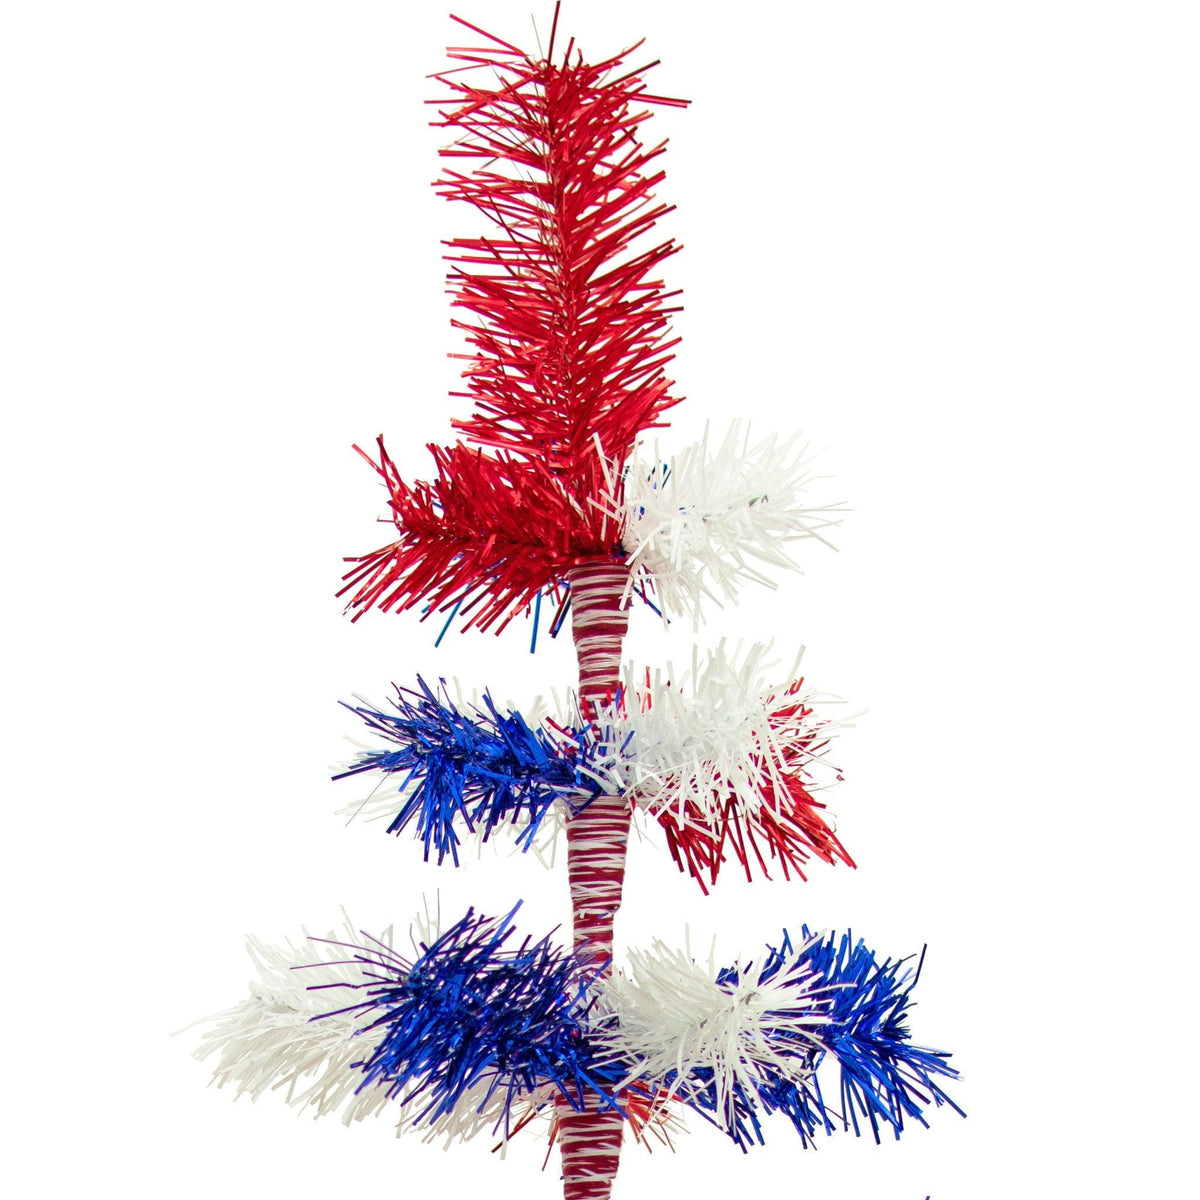 Top of the 36in Tall Red White and Blue Mixed Tinsel Christmas Tree on sale at leedisplay.com.